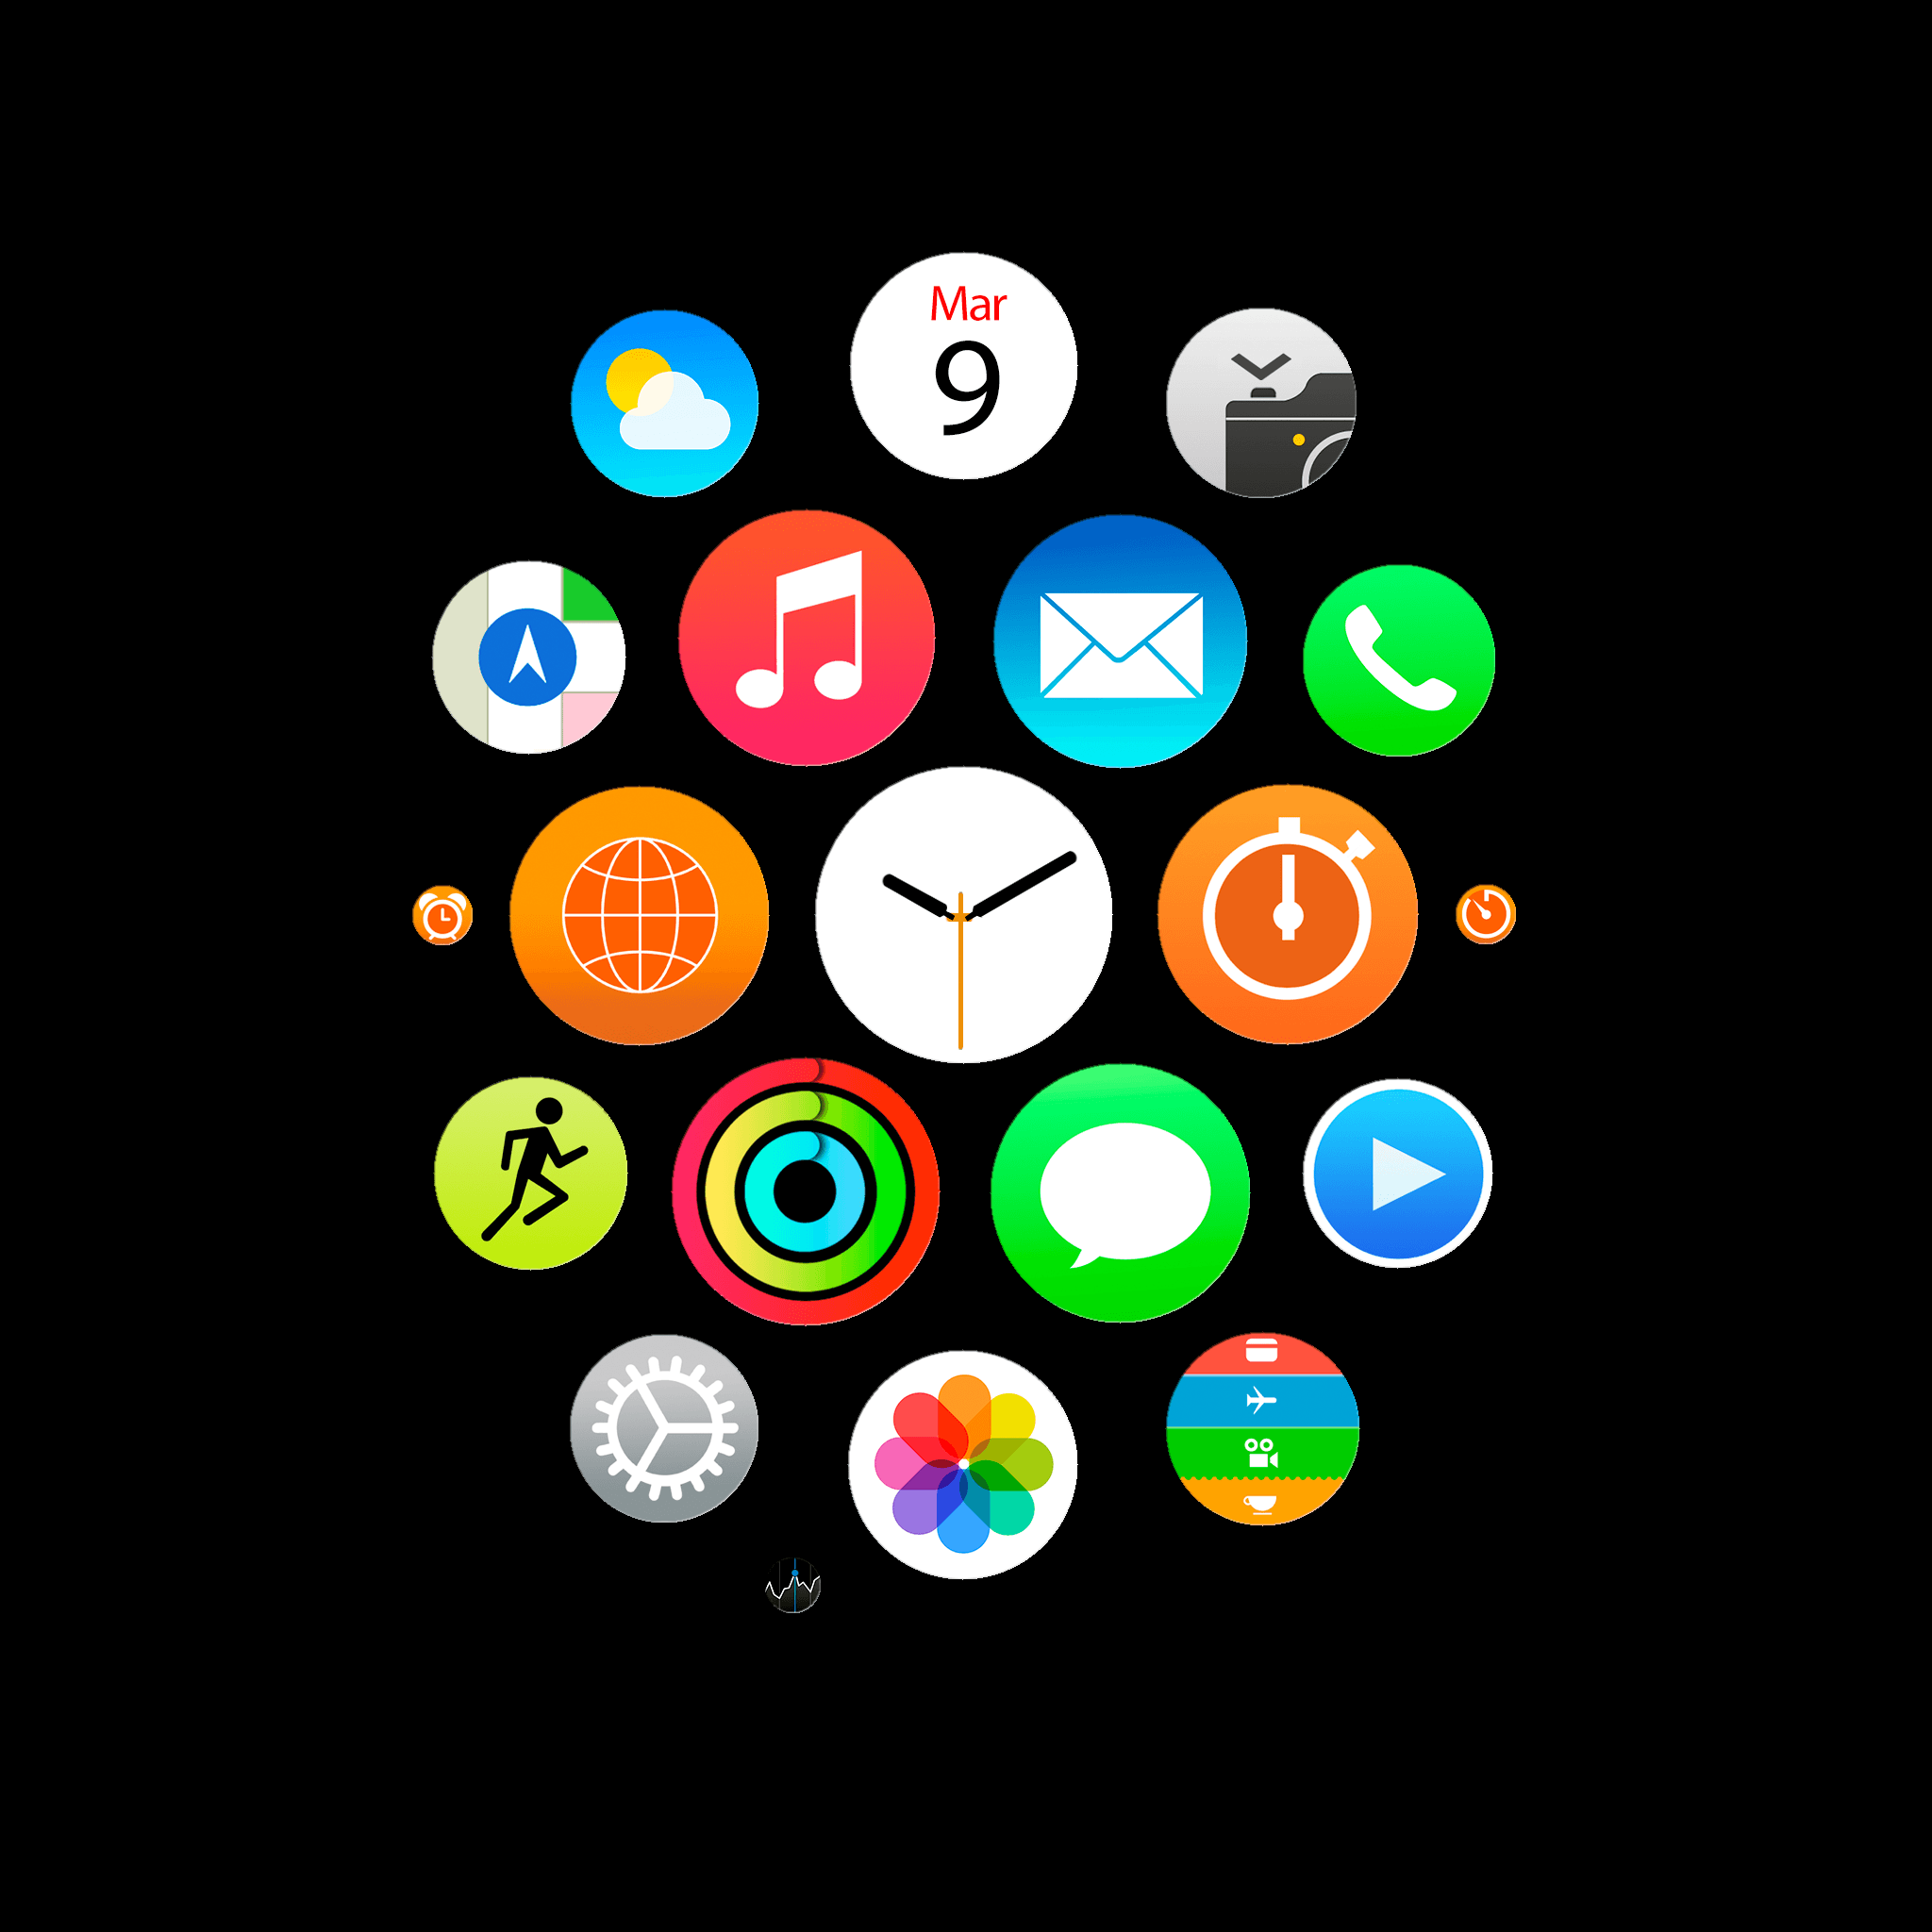 Apple Watch app icons wallpaper for iPhone, iPad, and desktop